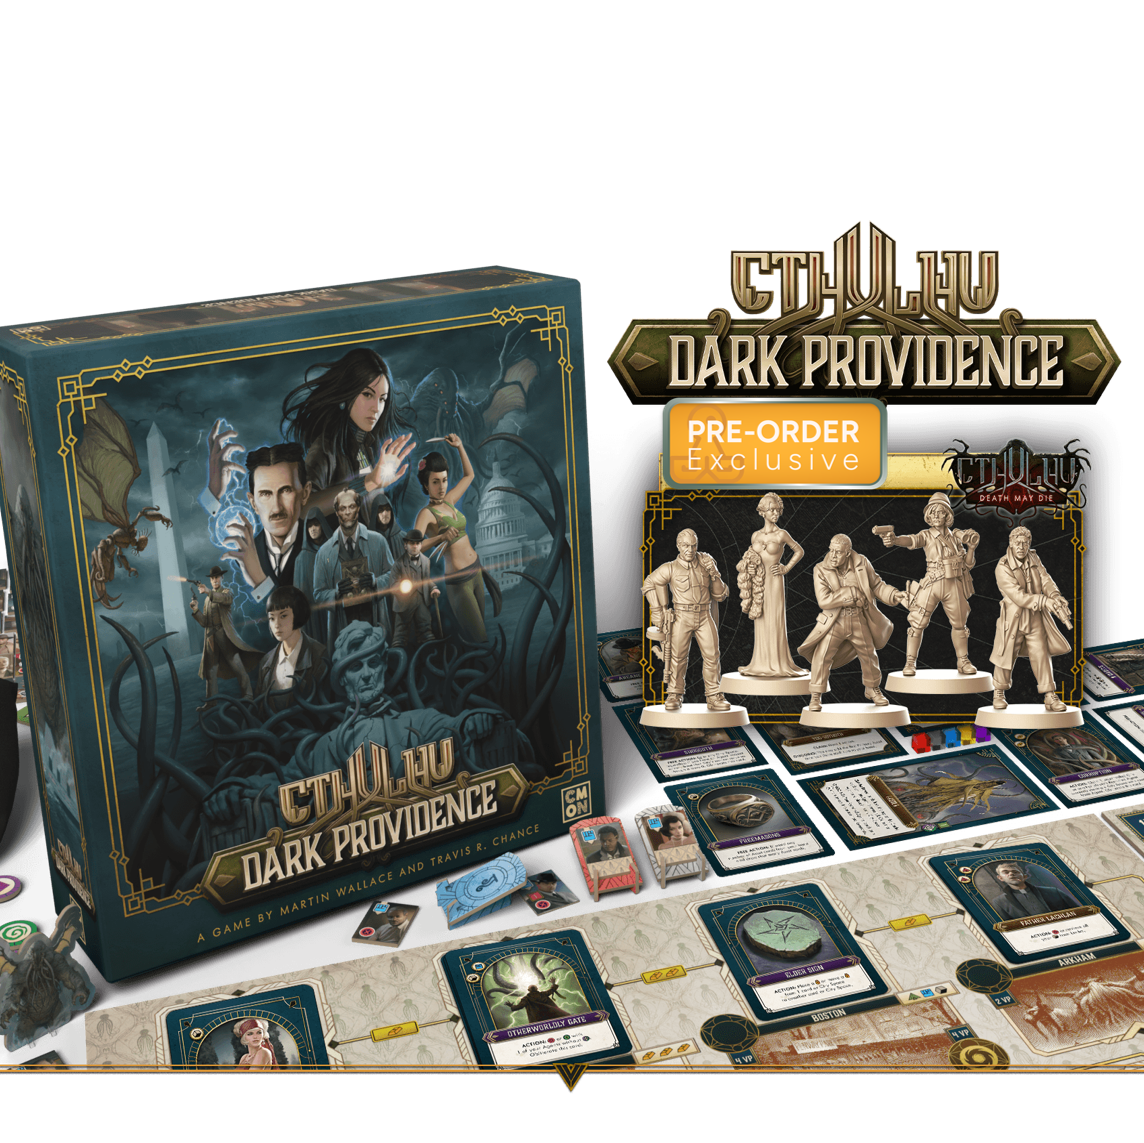 Exclusive Cthulhu: Dark Providence Board Game Overview